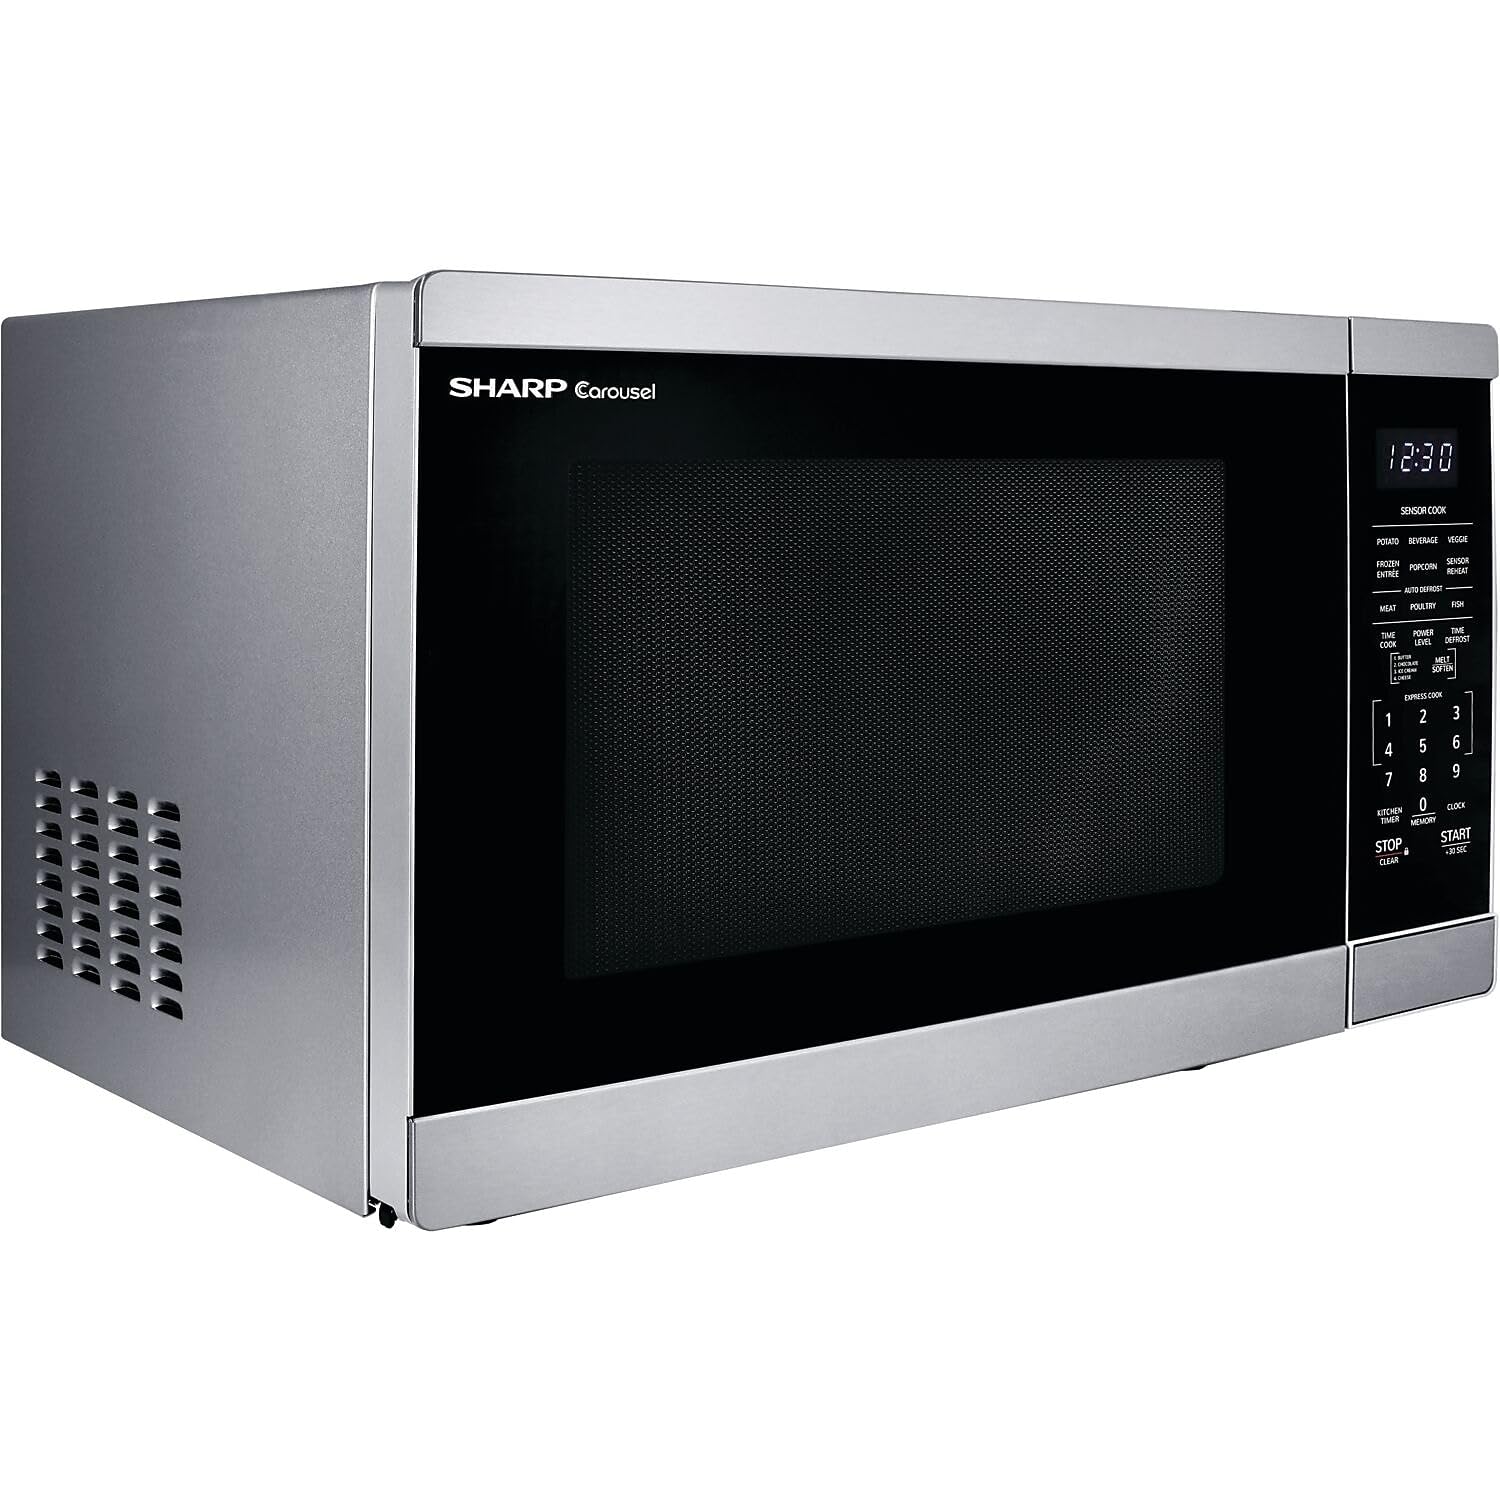 SHARP ZSMC1464HS Oven with Removable 12.4